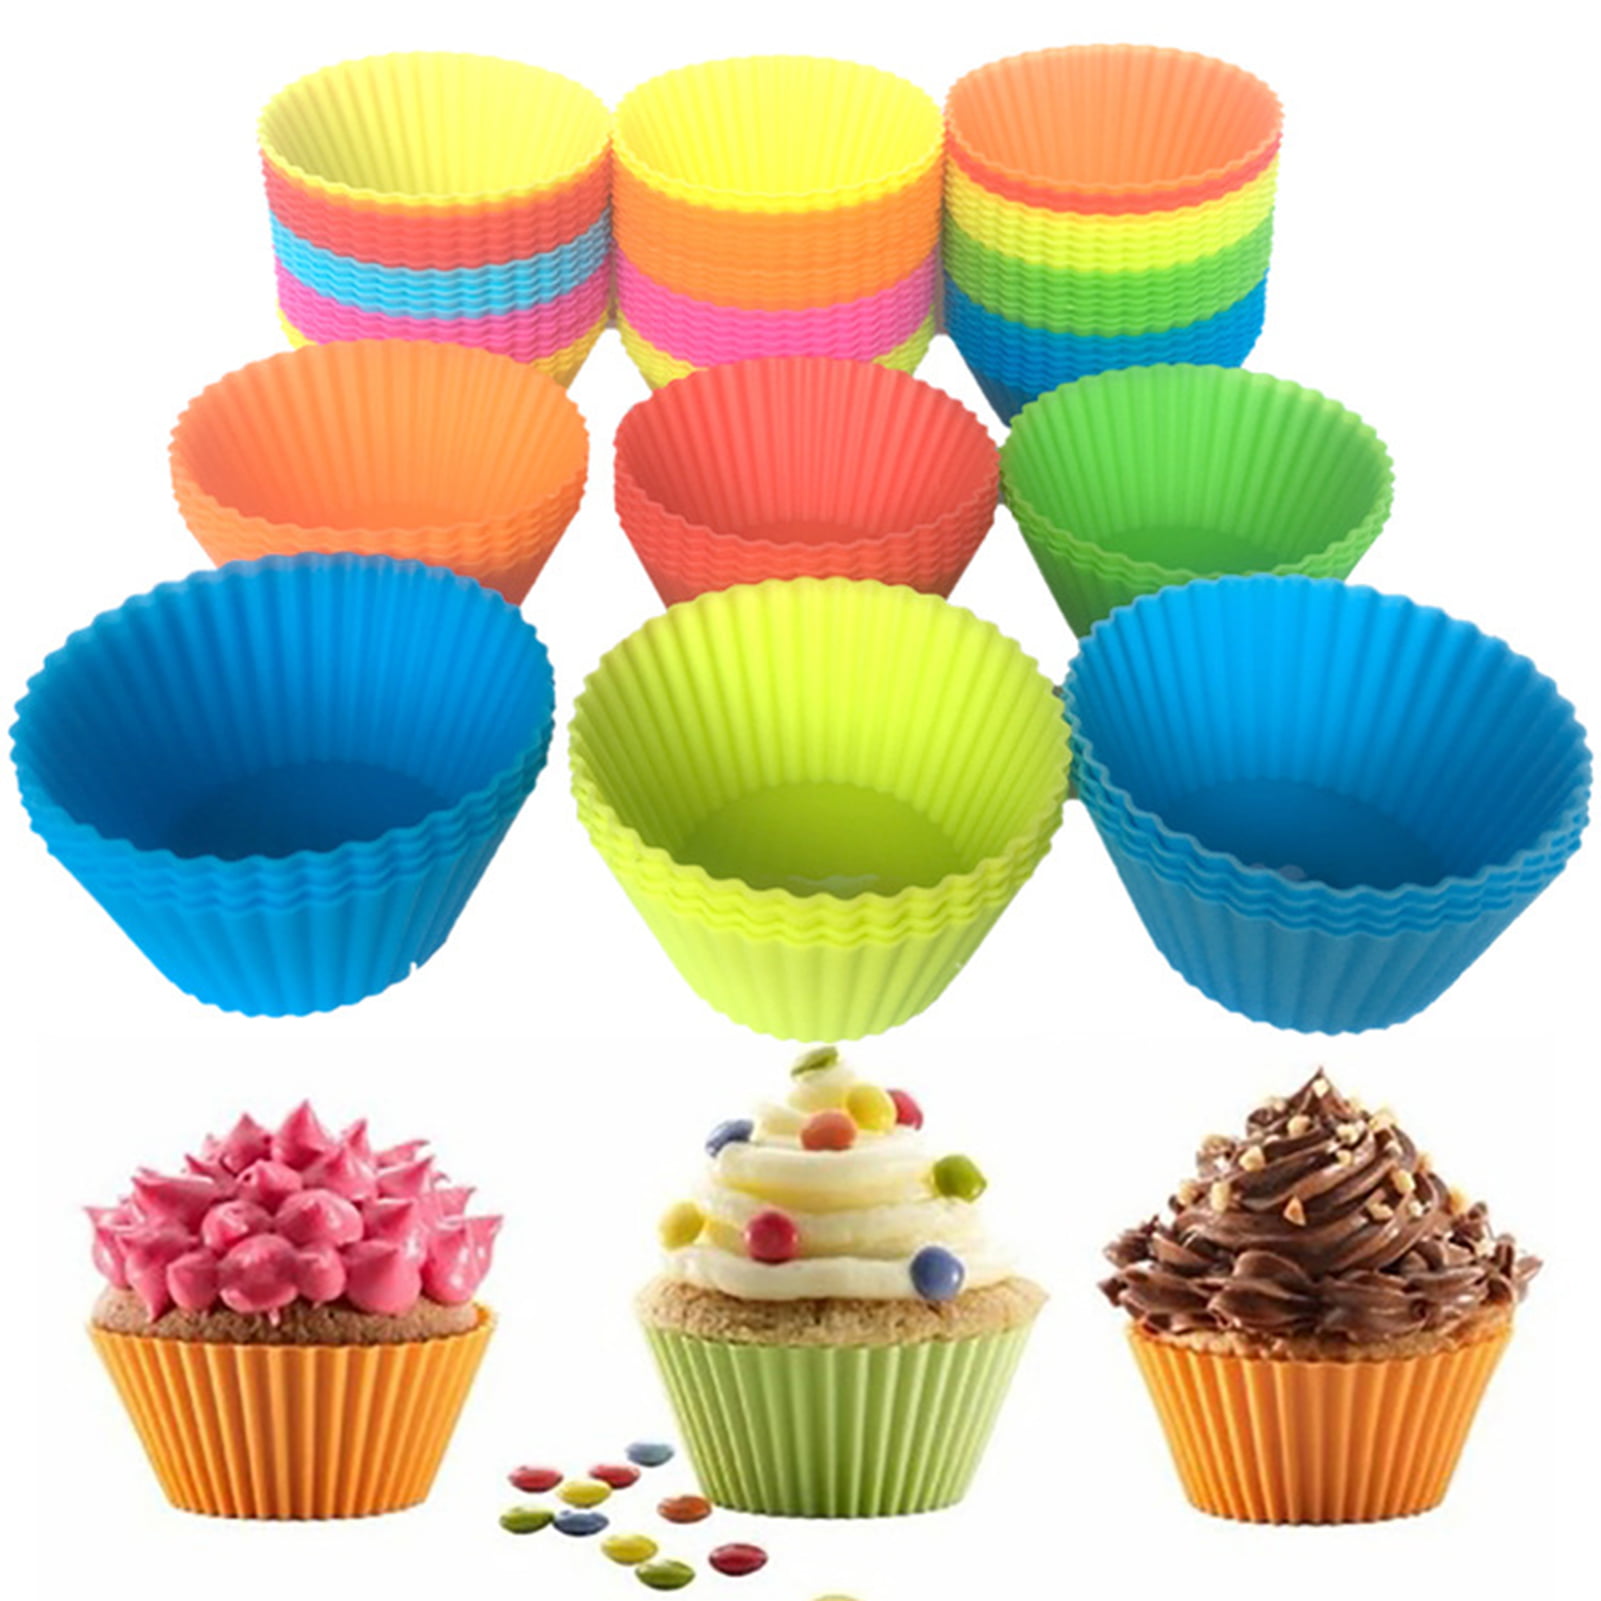 Details about   6-Cup Kitchen Cake Mold Non-Stick Baking Muffin Cupcake Tray Pan Cooking Tools 